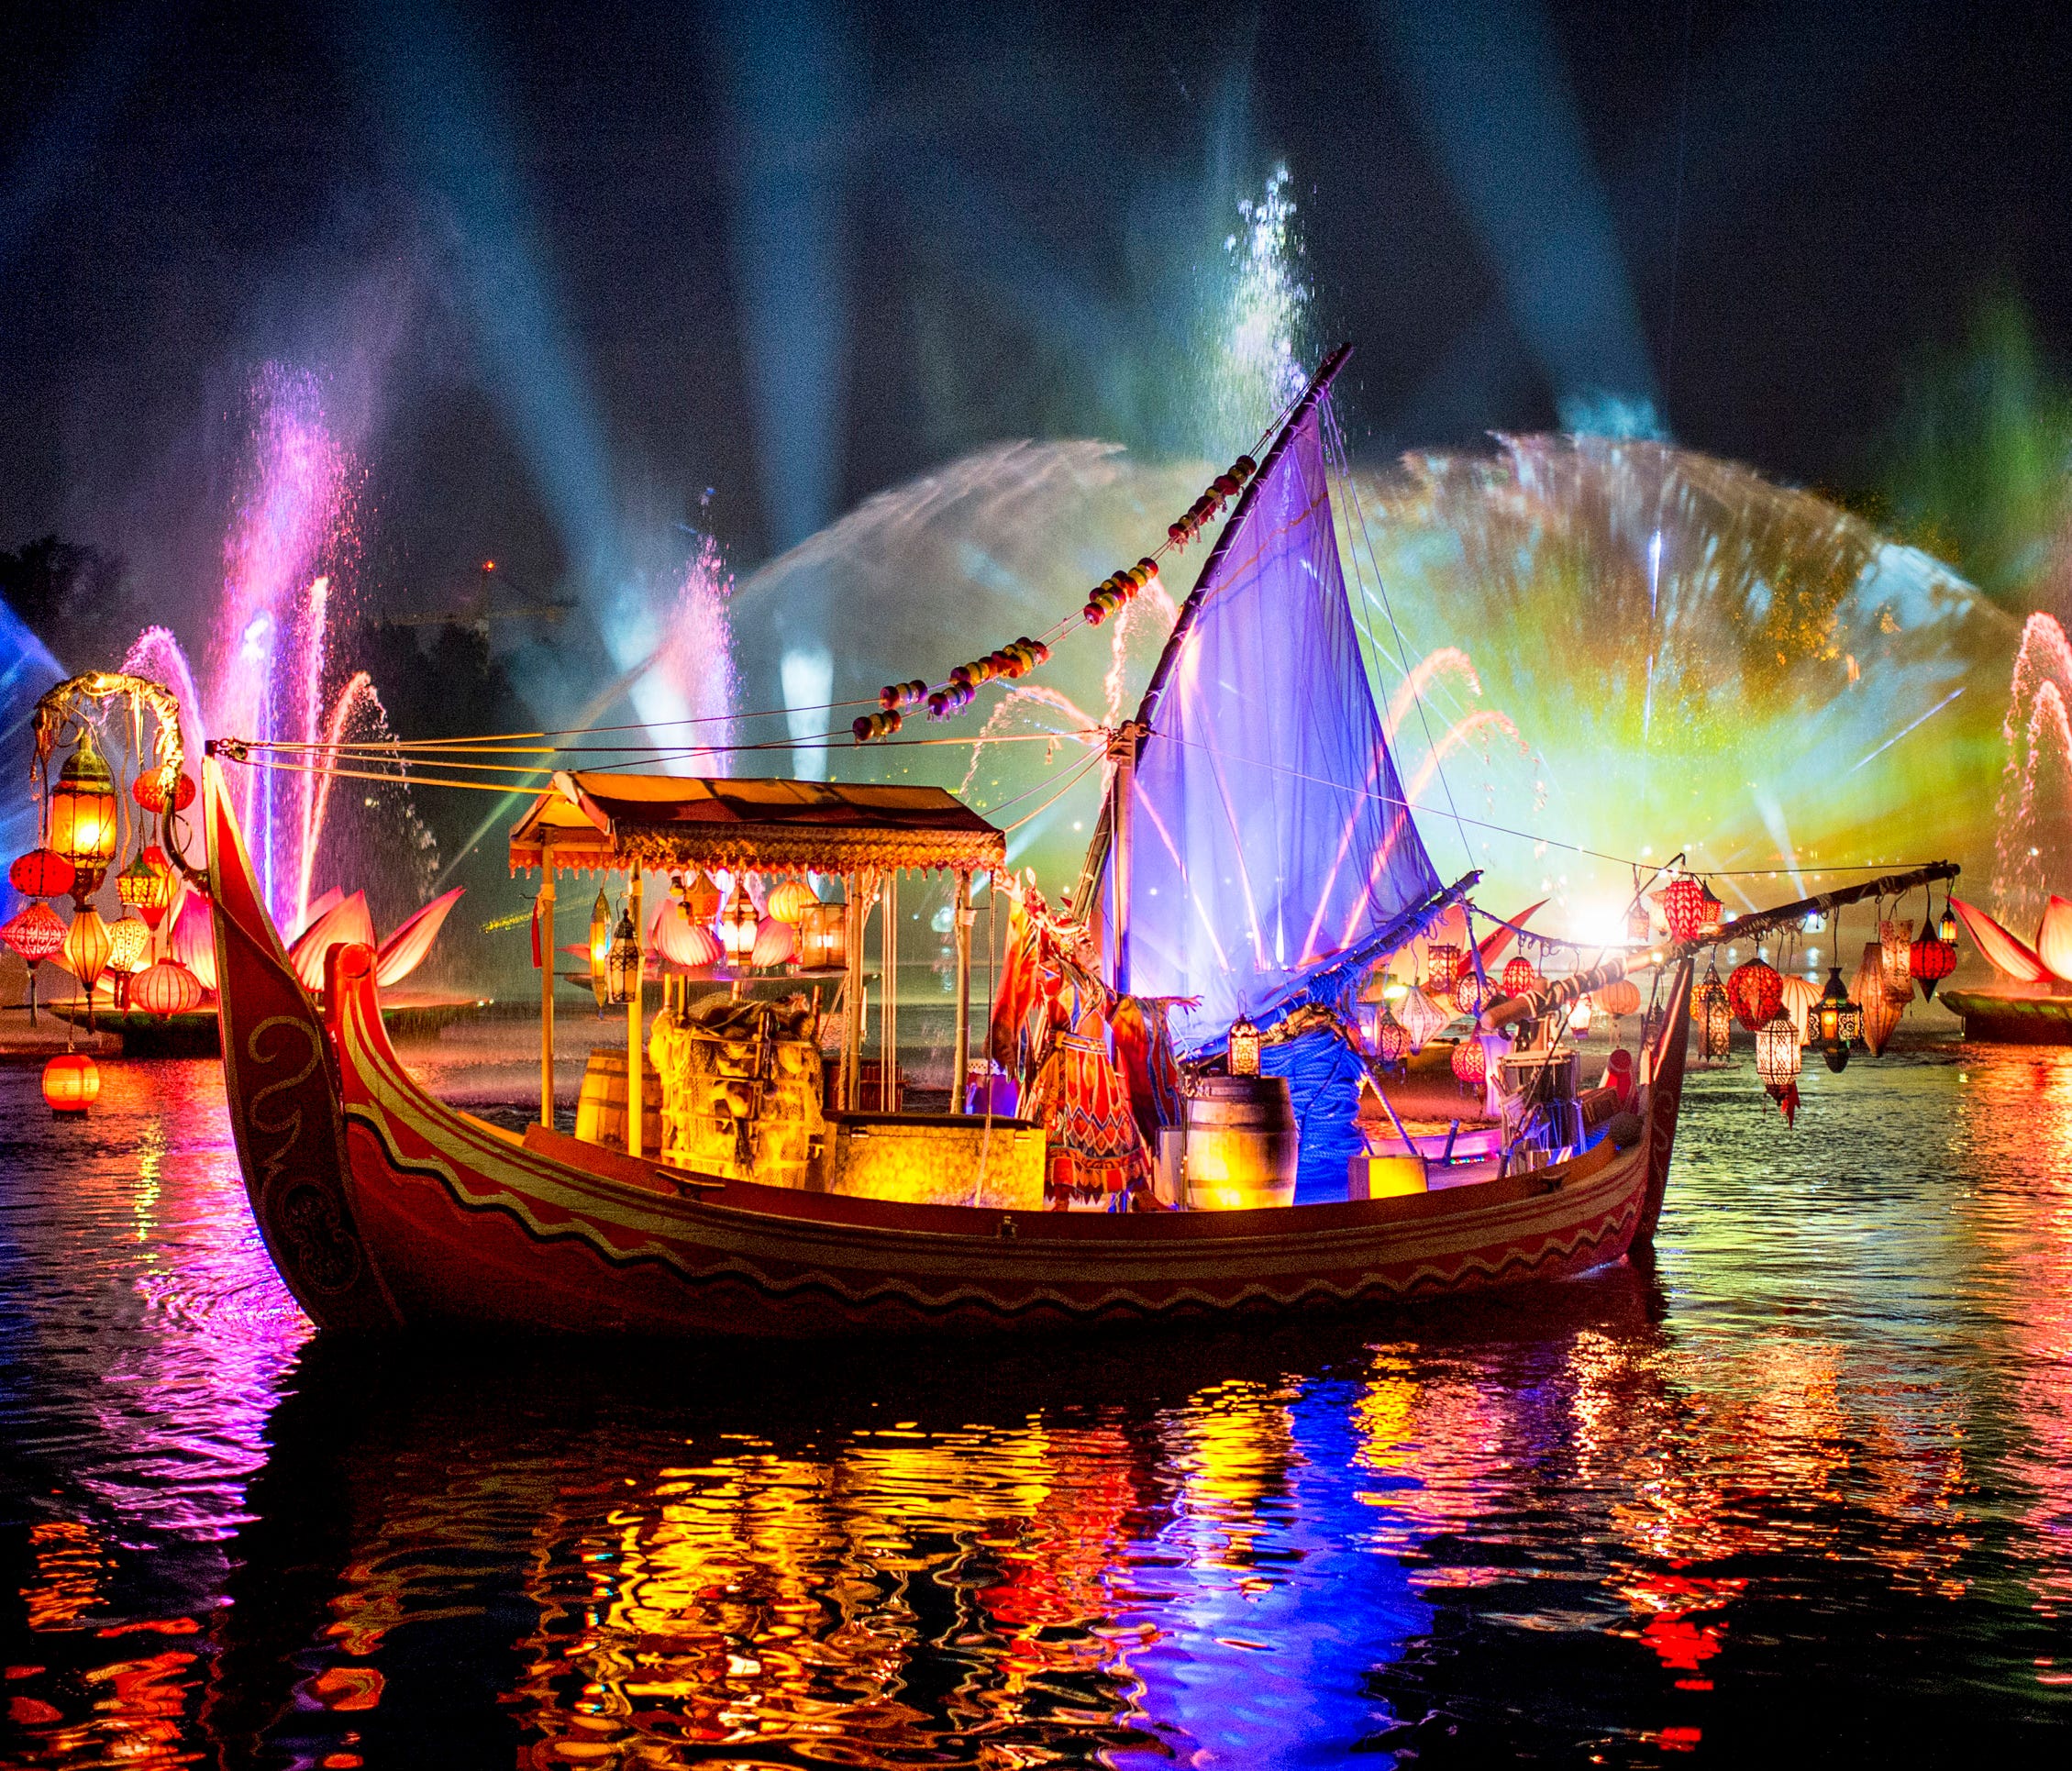 Rivers of Light is an all-new nighttime show at Disney's Animal Kingdom at Walt Disney World Resort. Rich in symbolism and storytelling, the elaborate theatrical production takes guests on a breathtaking emotional journey -- a visual mix of water, fi